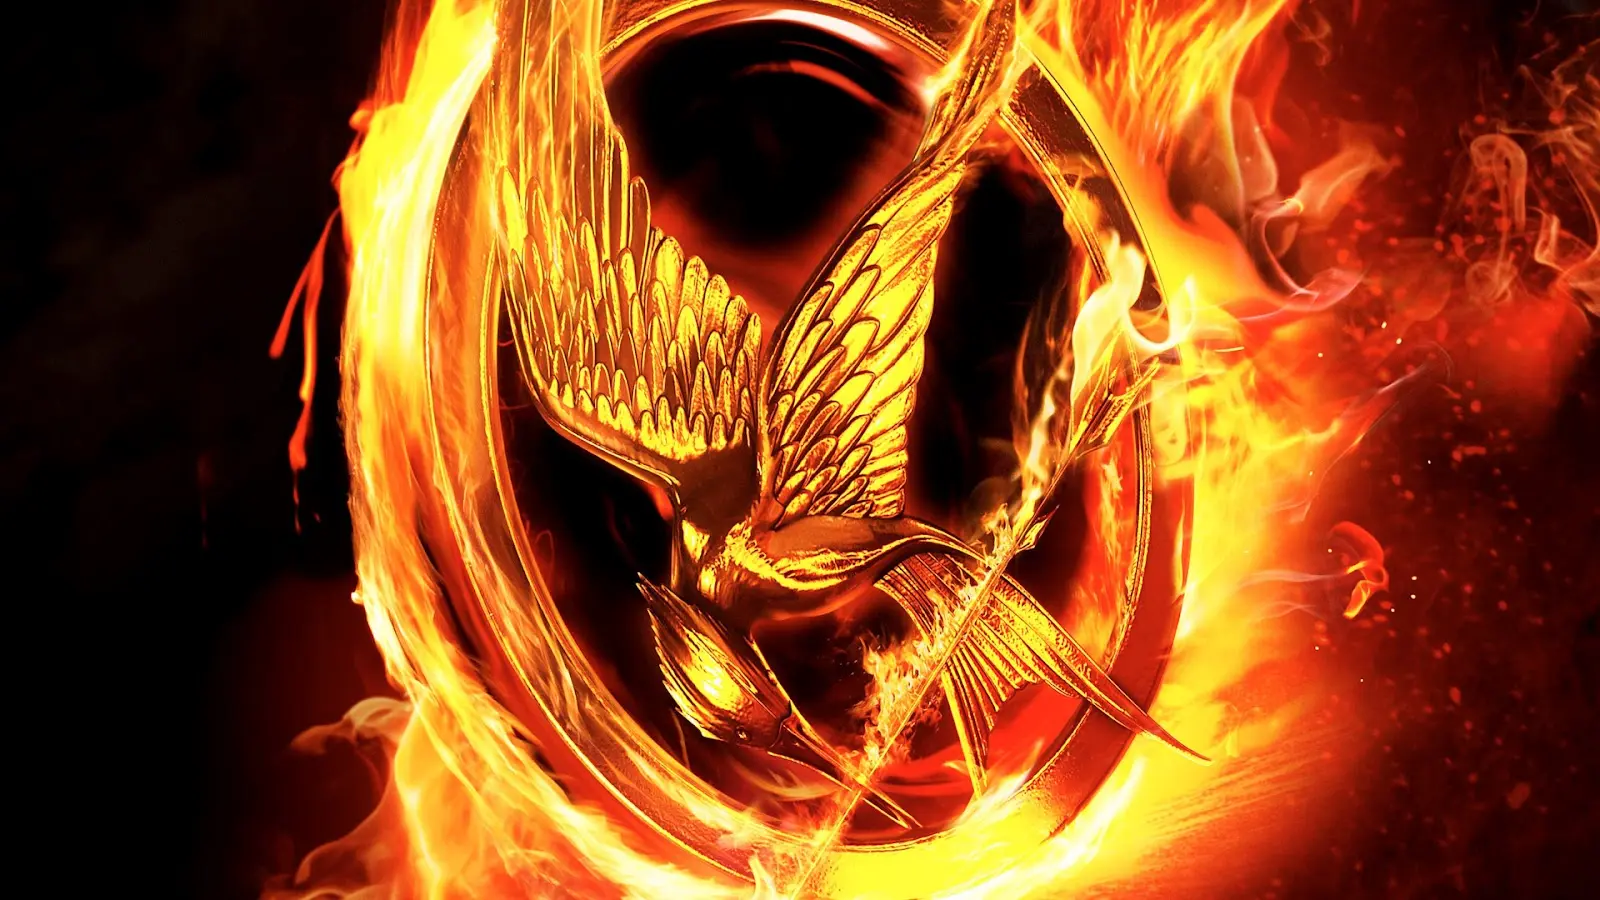 Movie The Hunger Games wallpaper 11 | Background Image